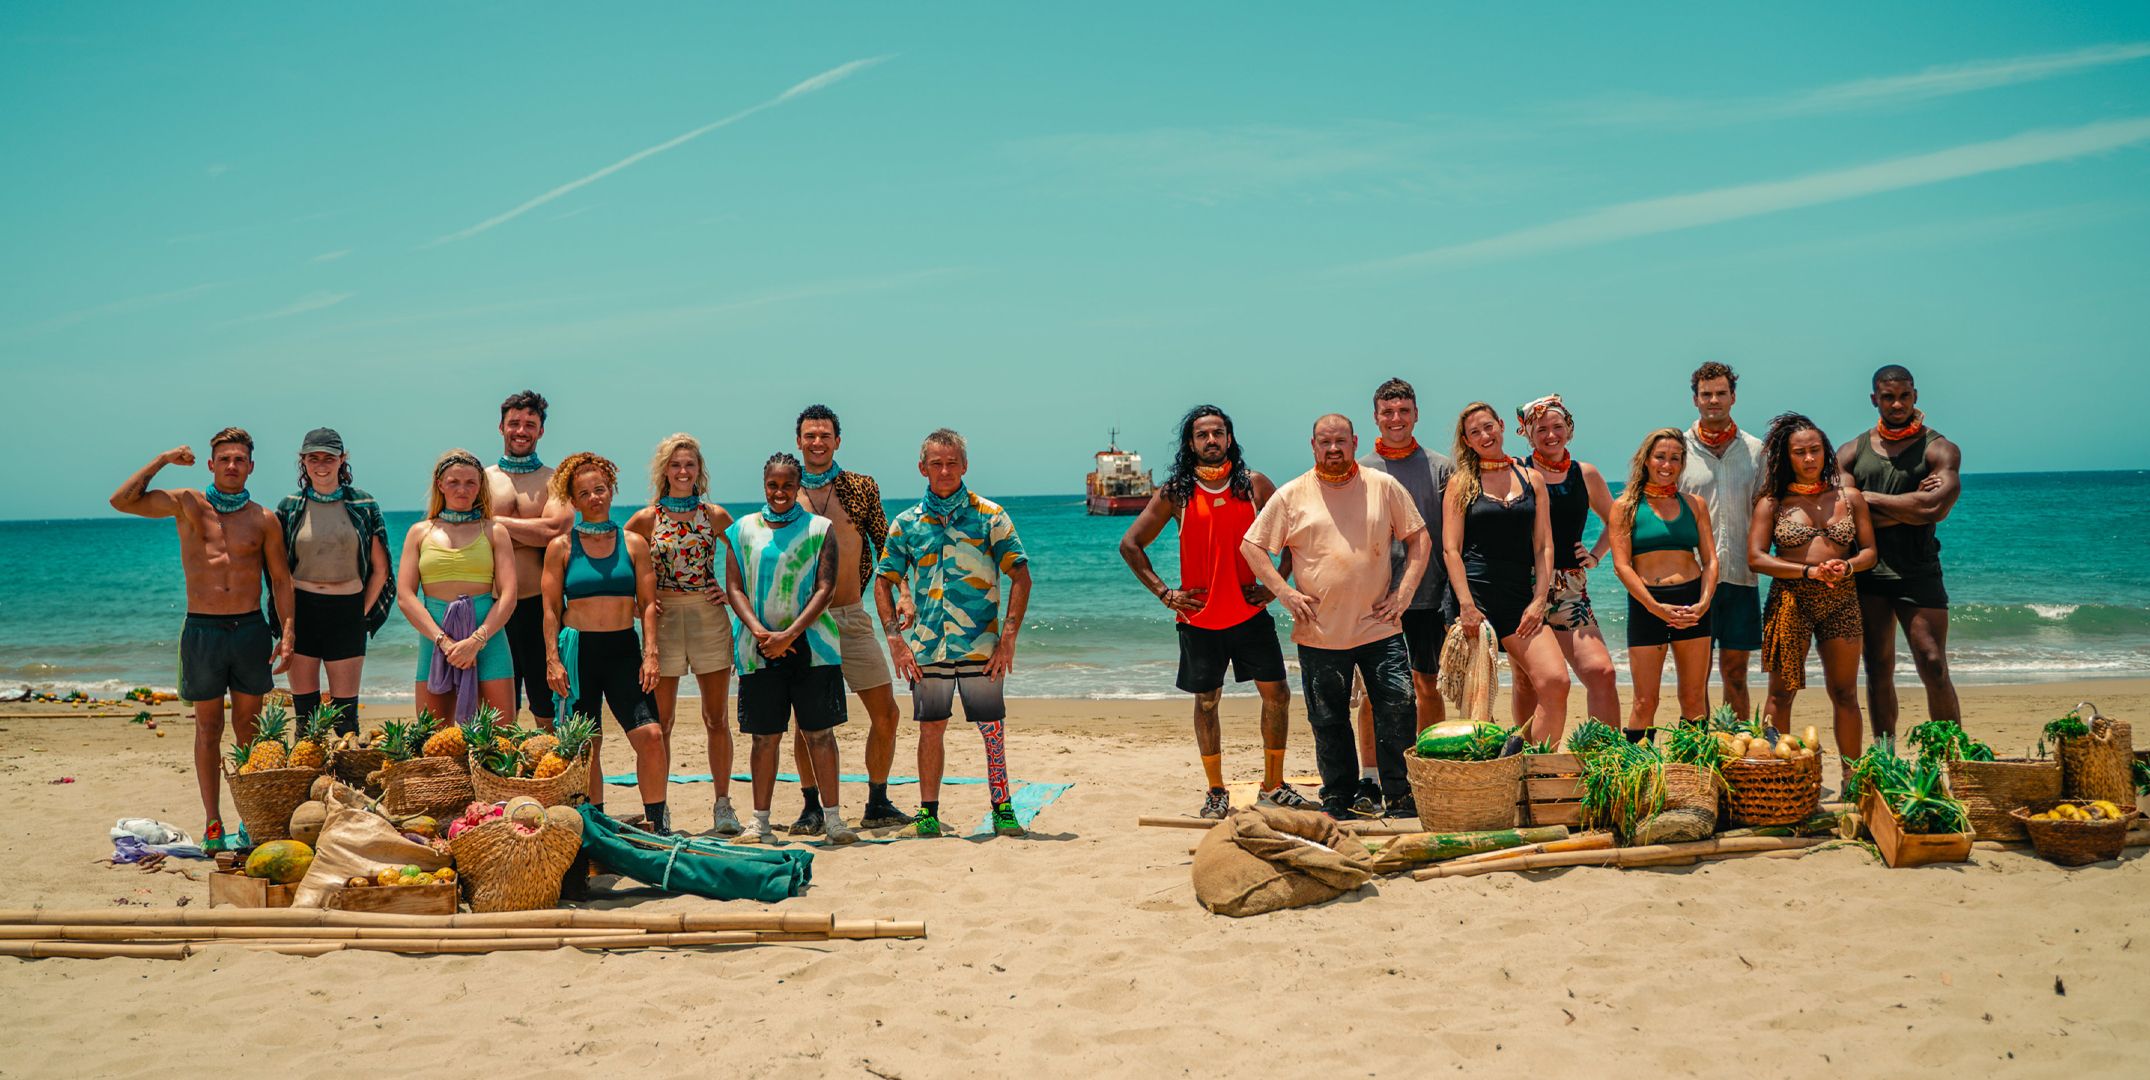 Survivor': Players Reveal What It's Like Competing on the Series